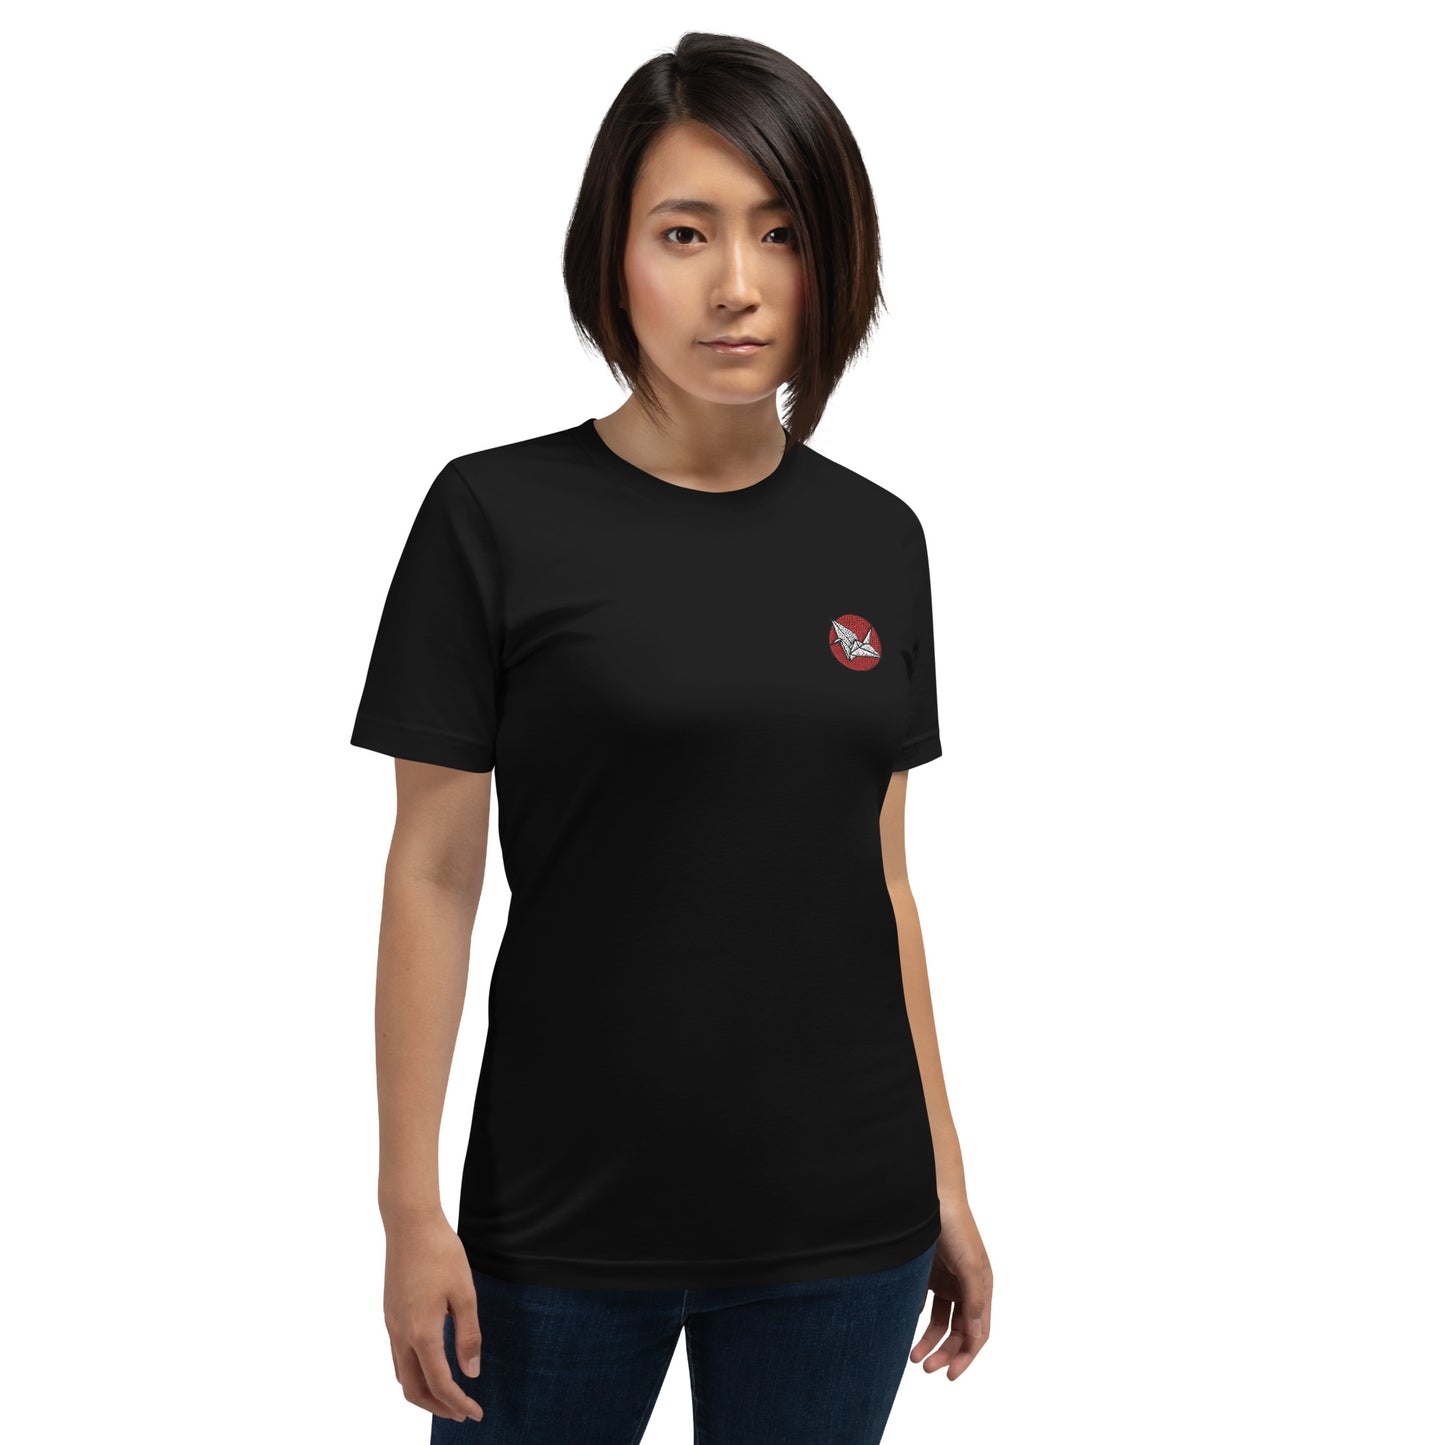 Woman wearing NOMADA Origami Crane embroidered t-shirt, Black color shirt.